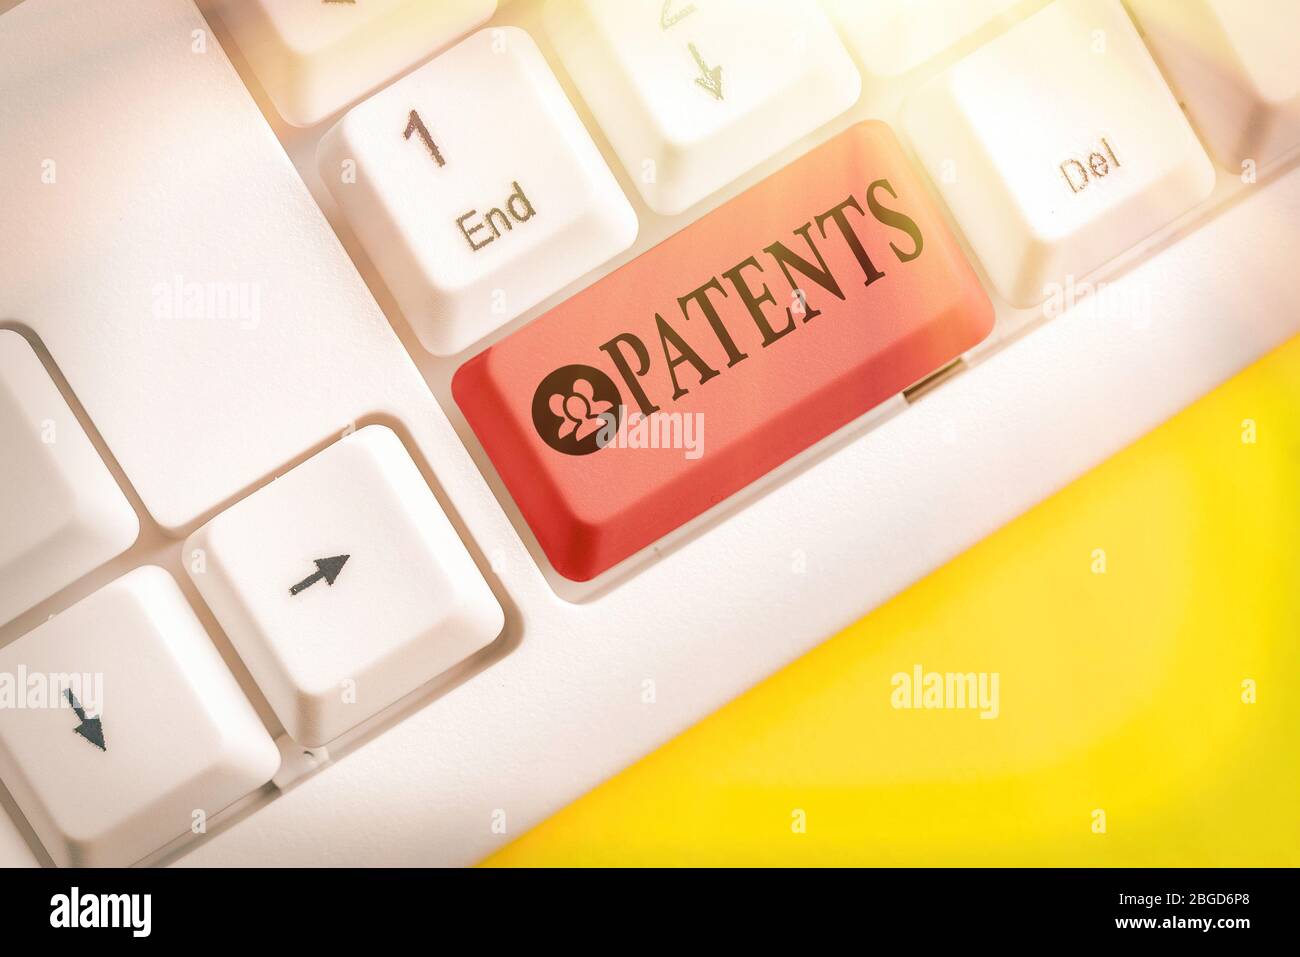 Author A Stock Photos Author A Stock Images Page 3 Alamy Images, Photos, Reviews